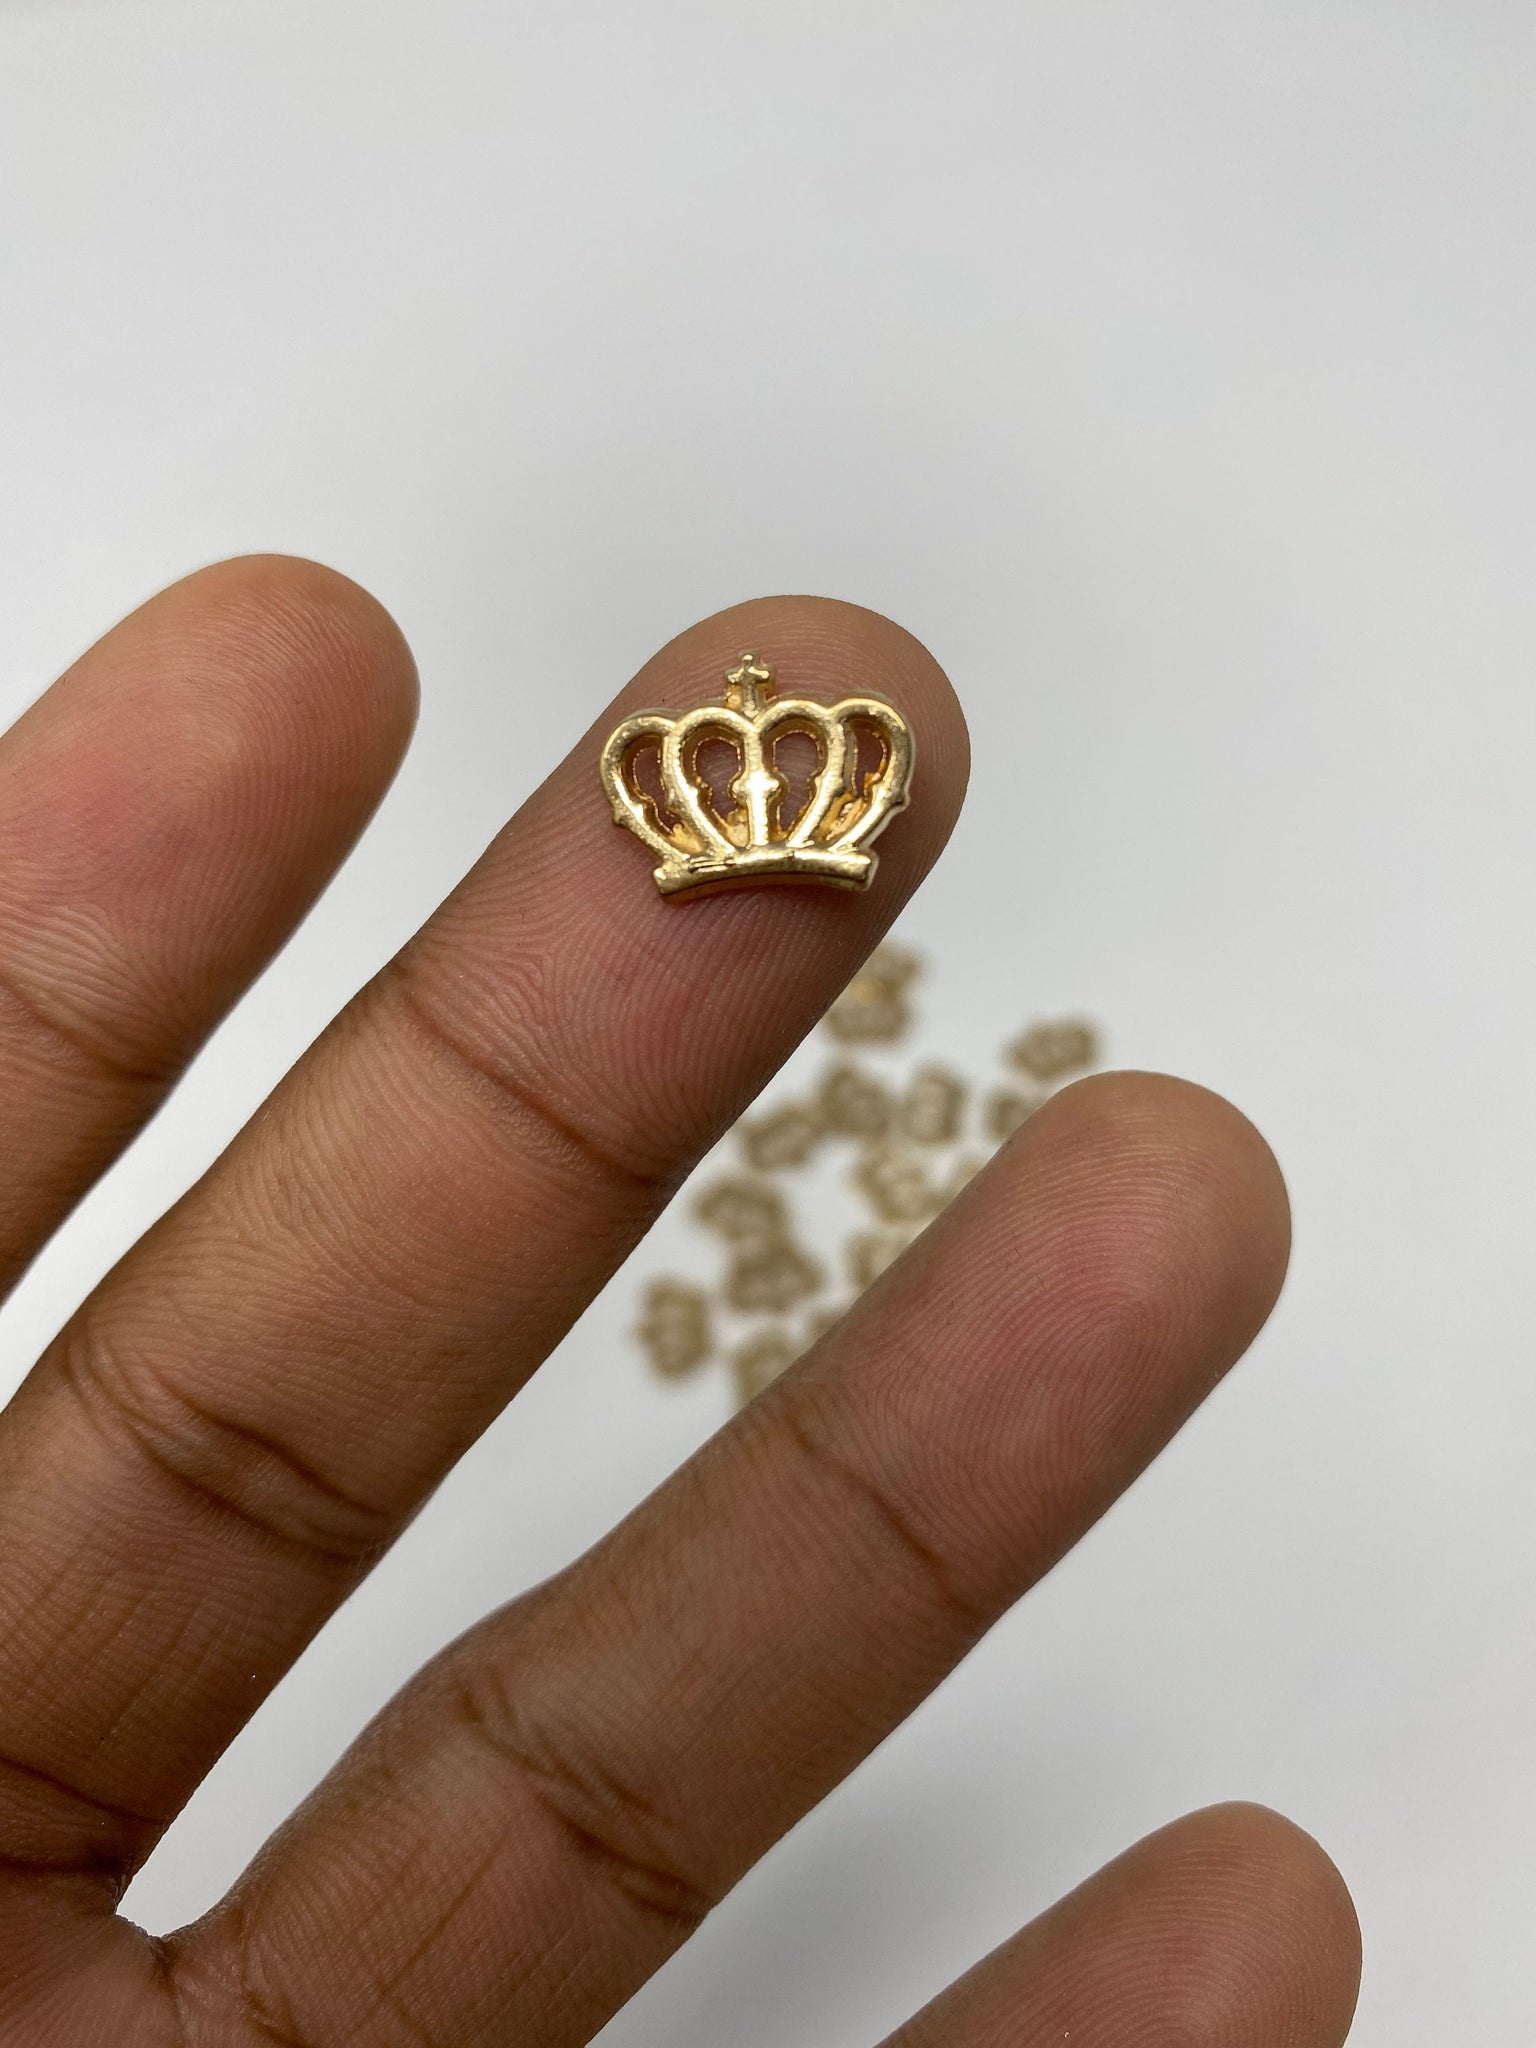 NEW, Hotfix Gold CROWNS, 100 Pcs, 12x15mm, (One Size) Gold, Great for Denim, Sweaters, Camo Jackets, Belts, Bags, Shoes, Crafts,+ MORE!